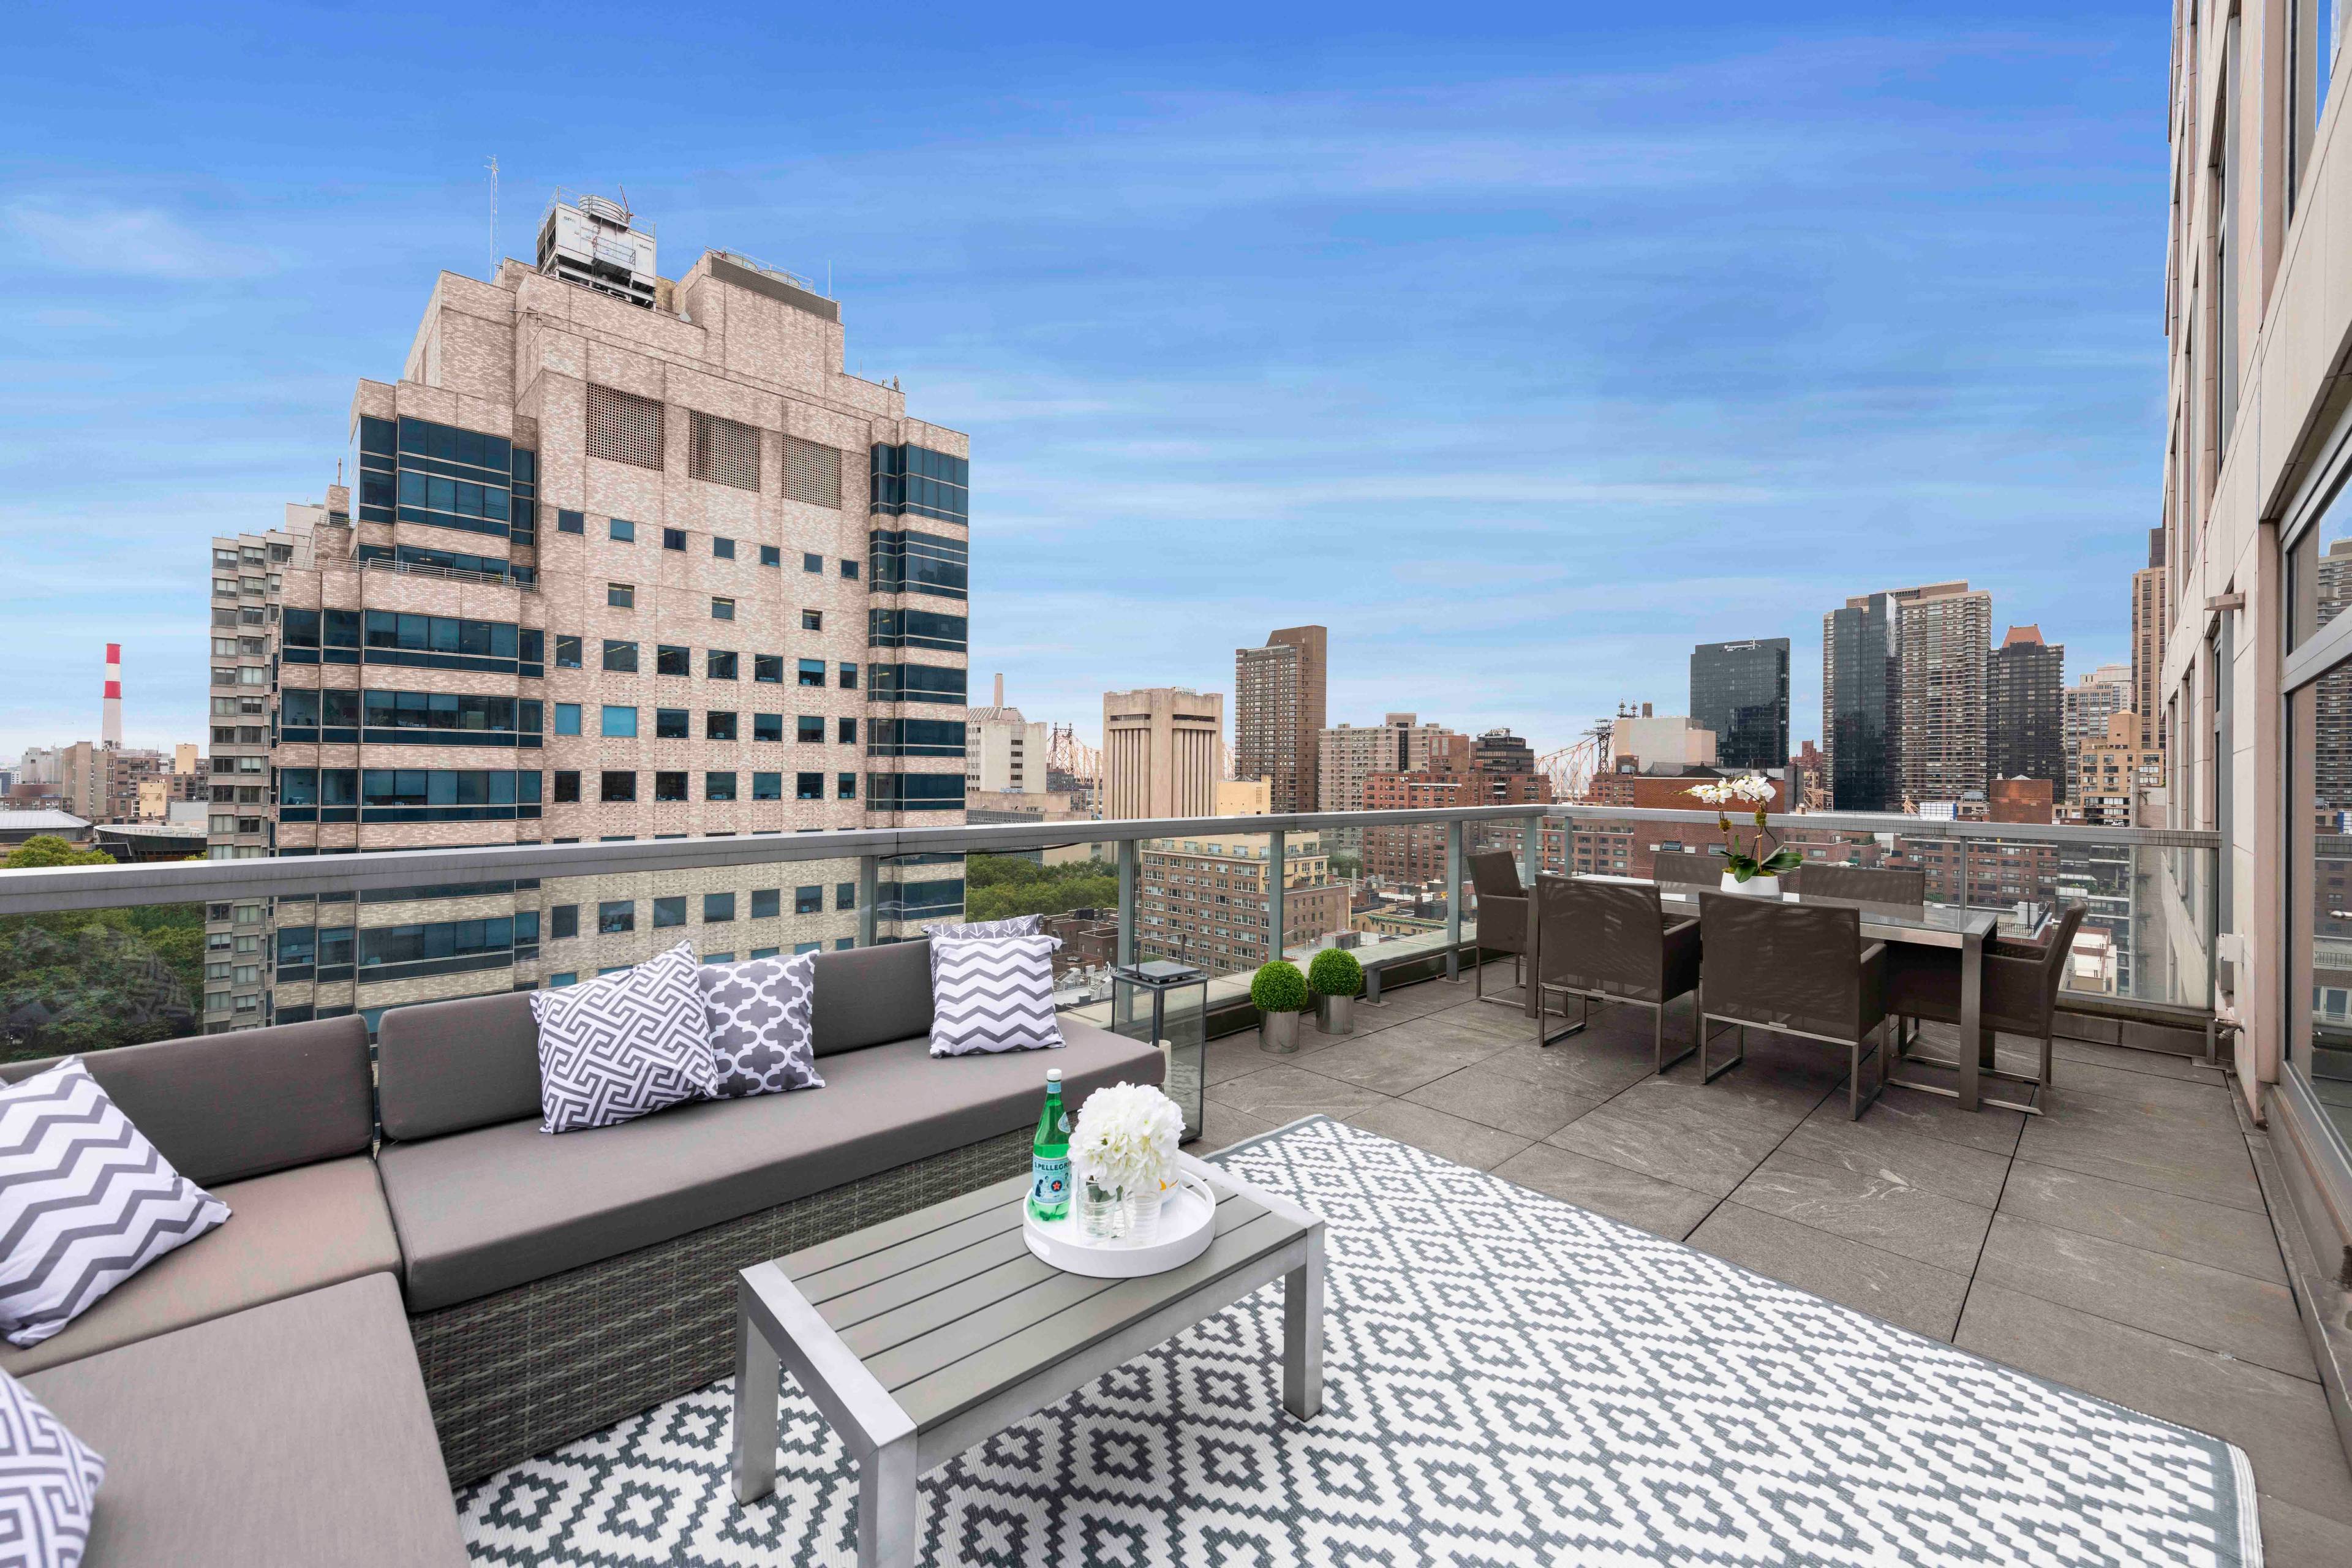 LARGE PRIVATE OUTDOOR TERRACE IN UES DESIGNER 3 BED CONDO IN AMENITY FILLED BUILDING!